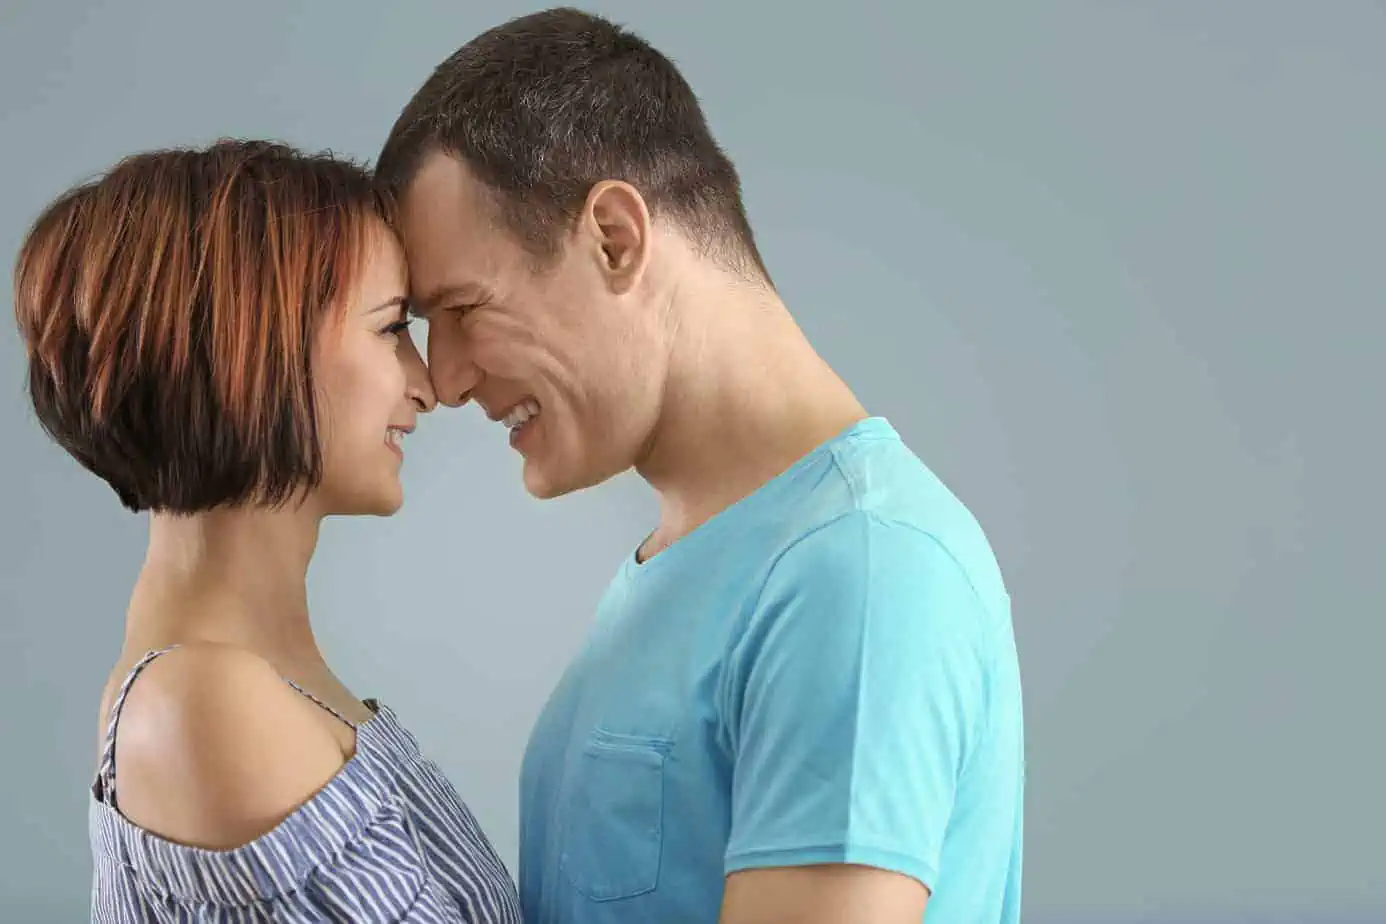 A man and a woman smiling at each other